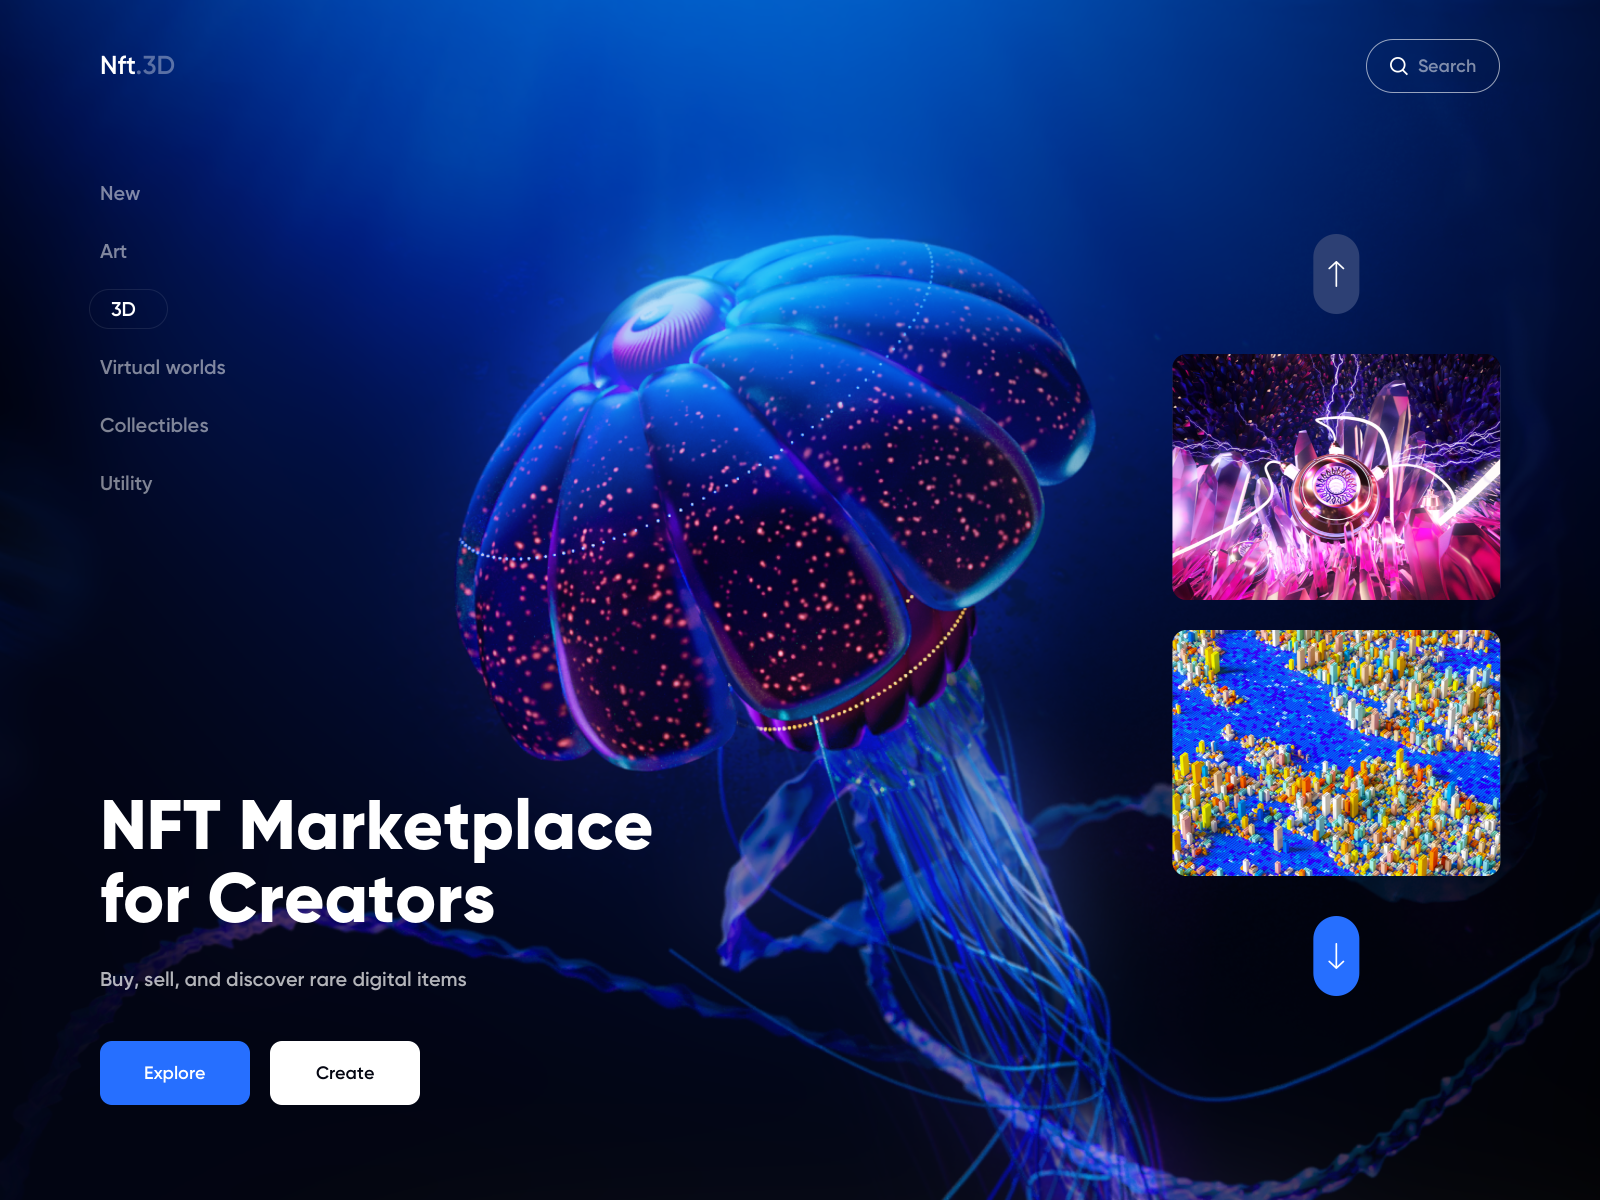 NFT Marketplace - Web Design with 3Ds by Outcrowd on Dribbble